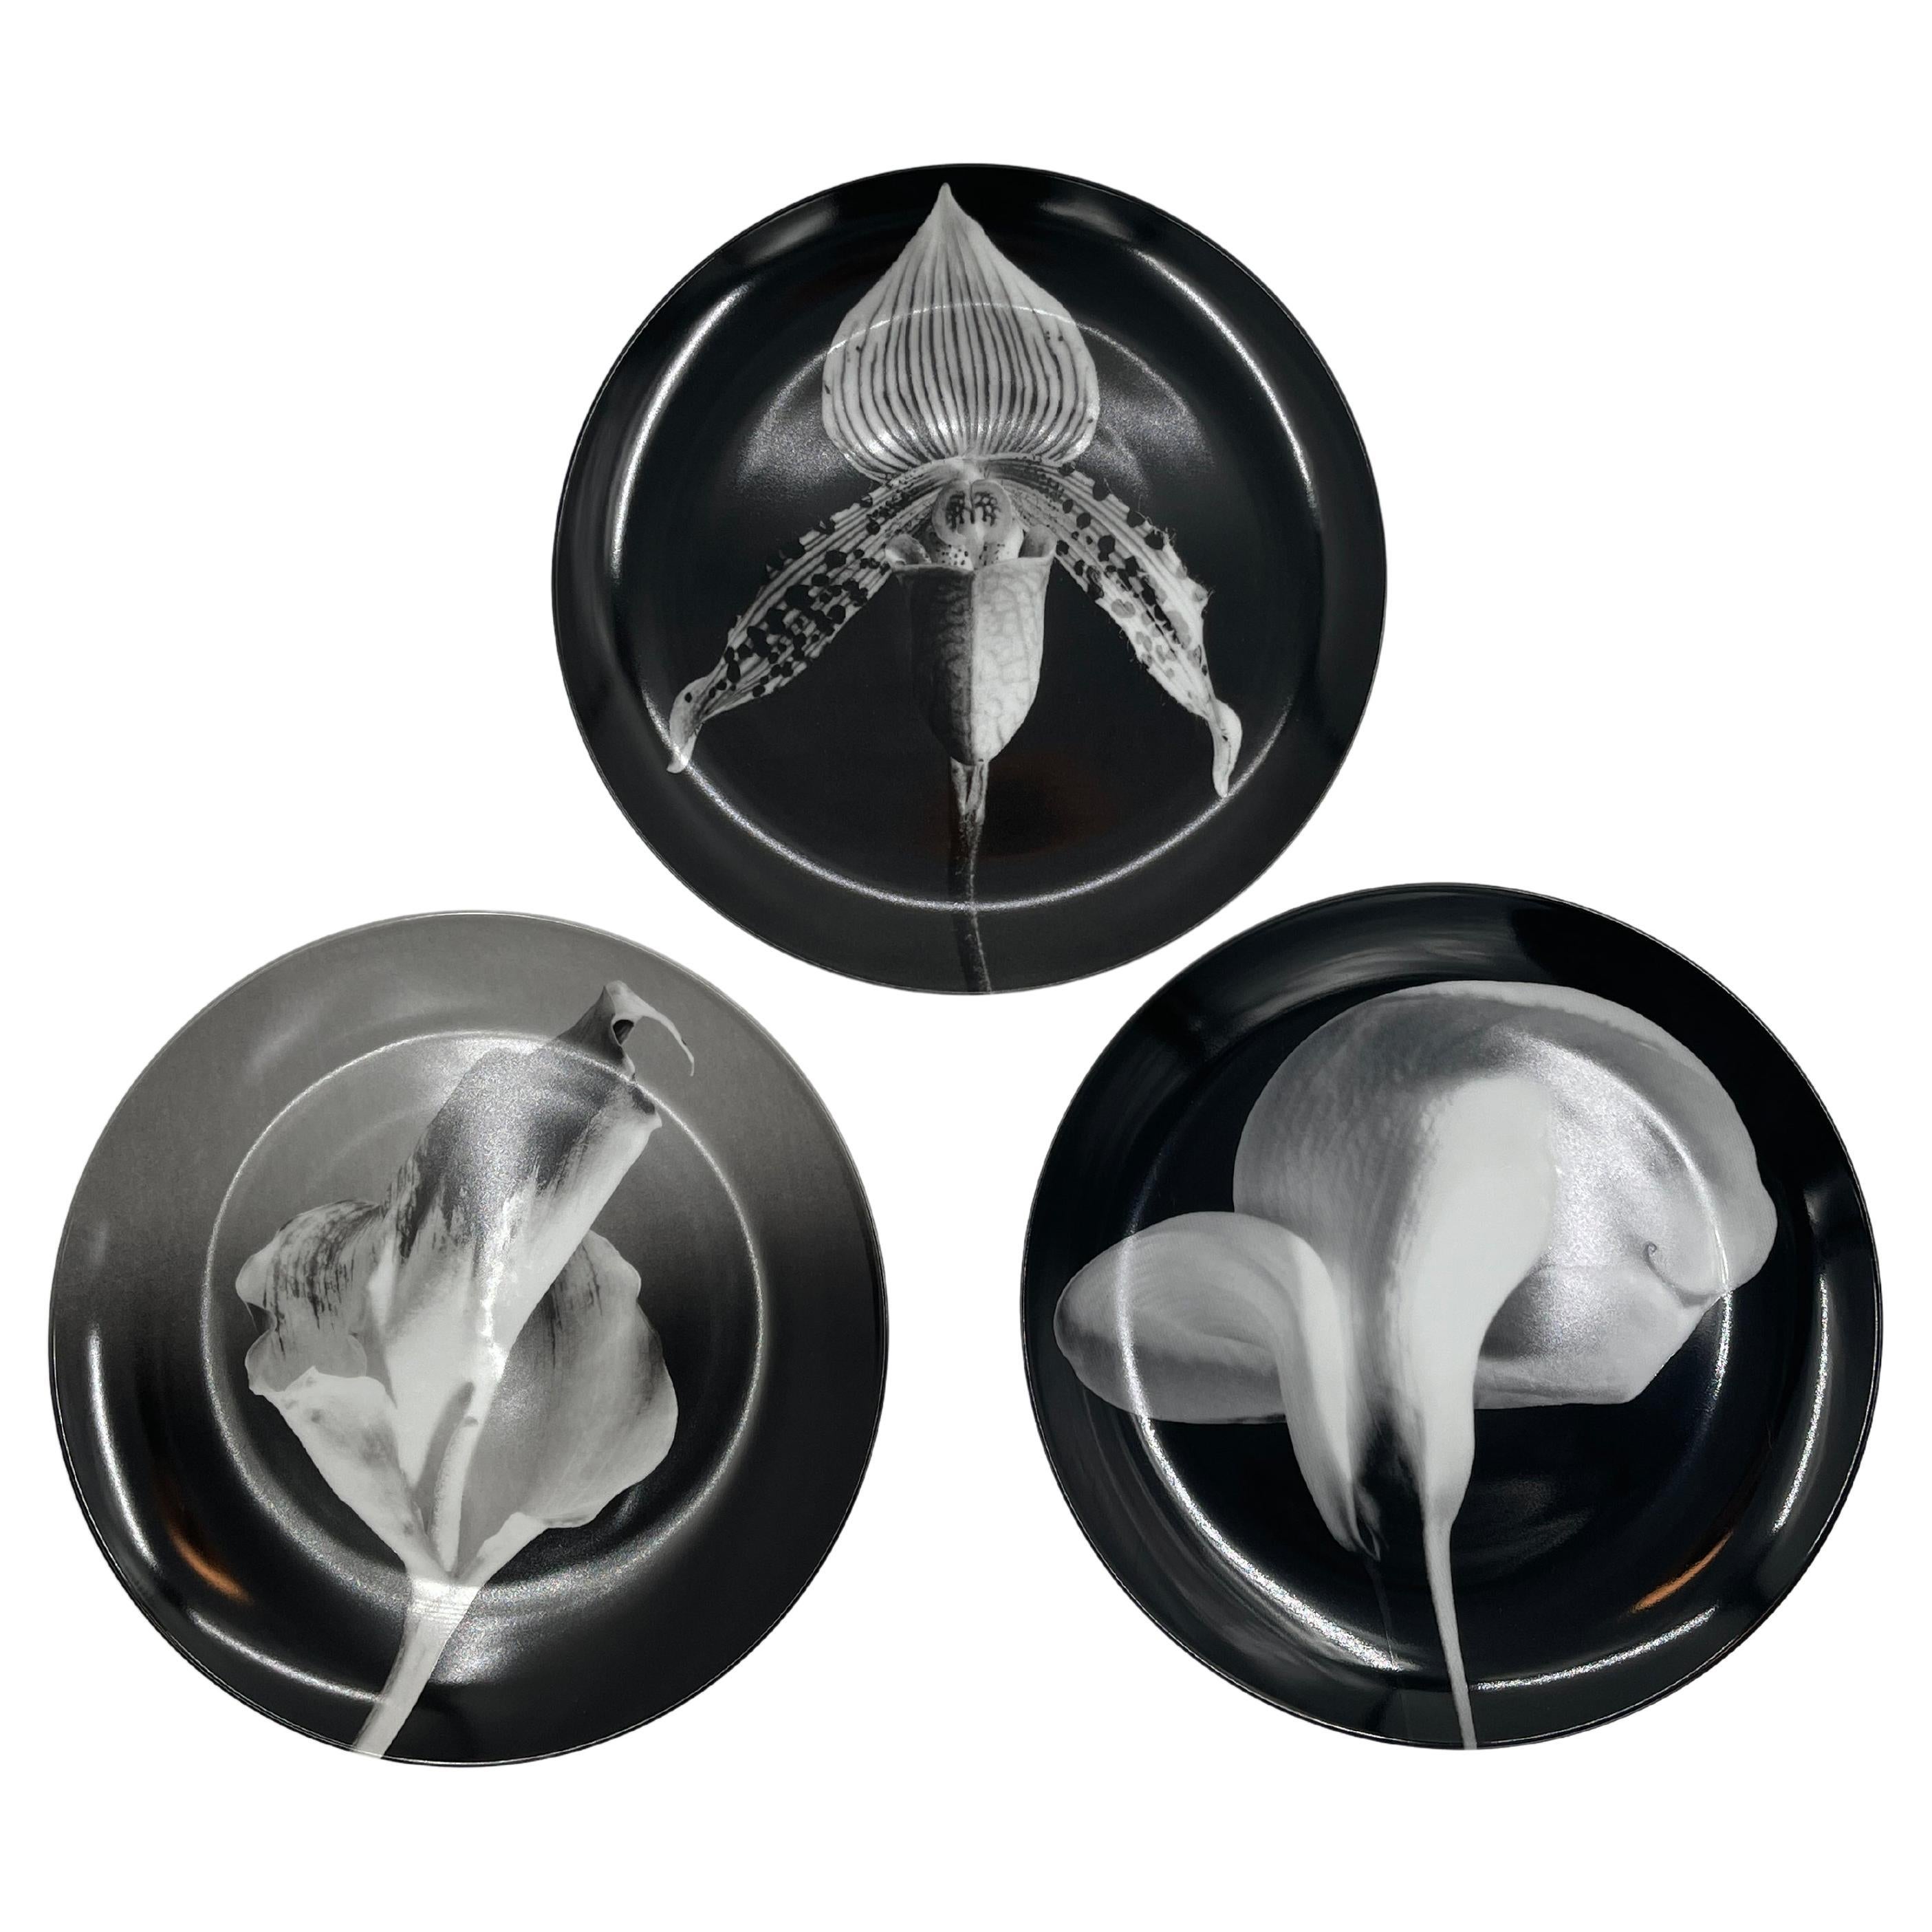 Swid Powell - Robert Mapplethorpe Porcelain Plates, Orchid - Flower - Calla Lily For Sale